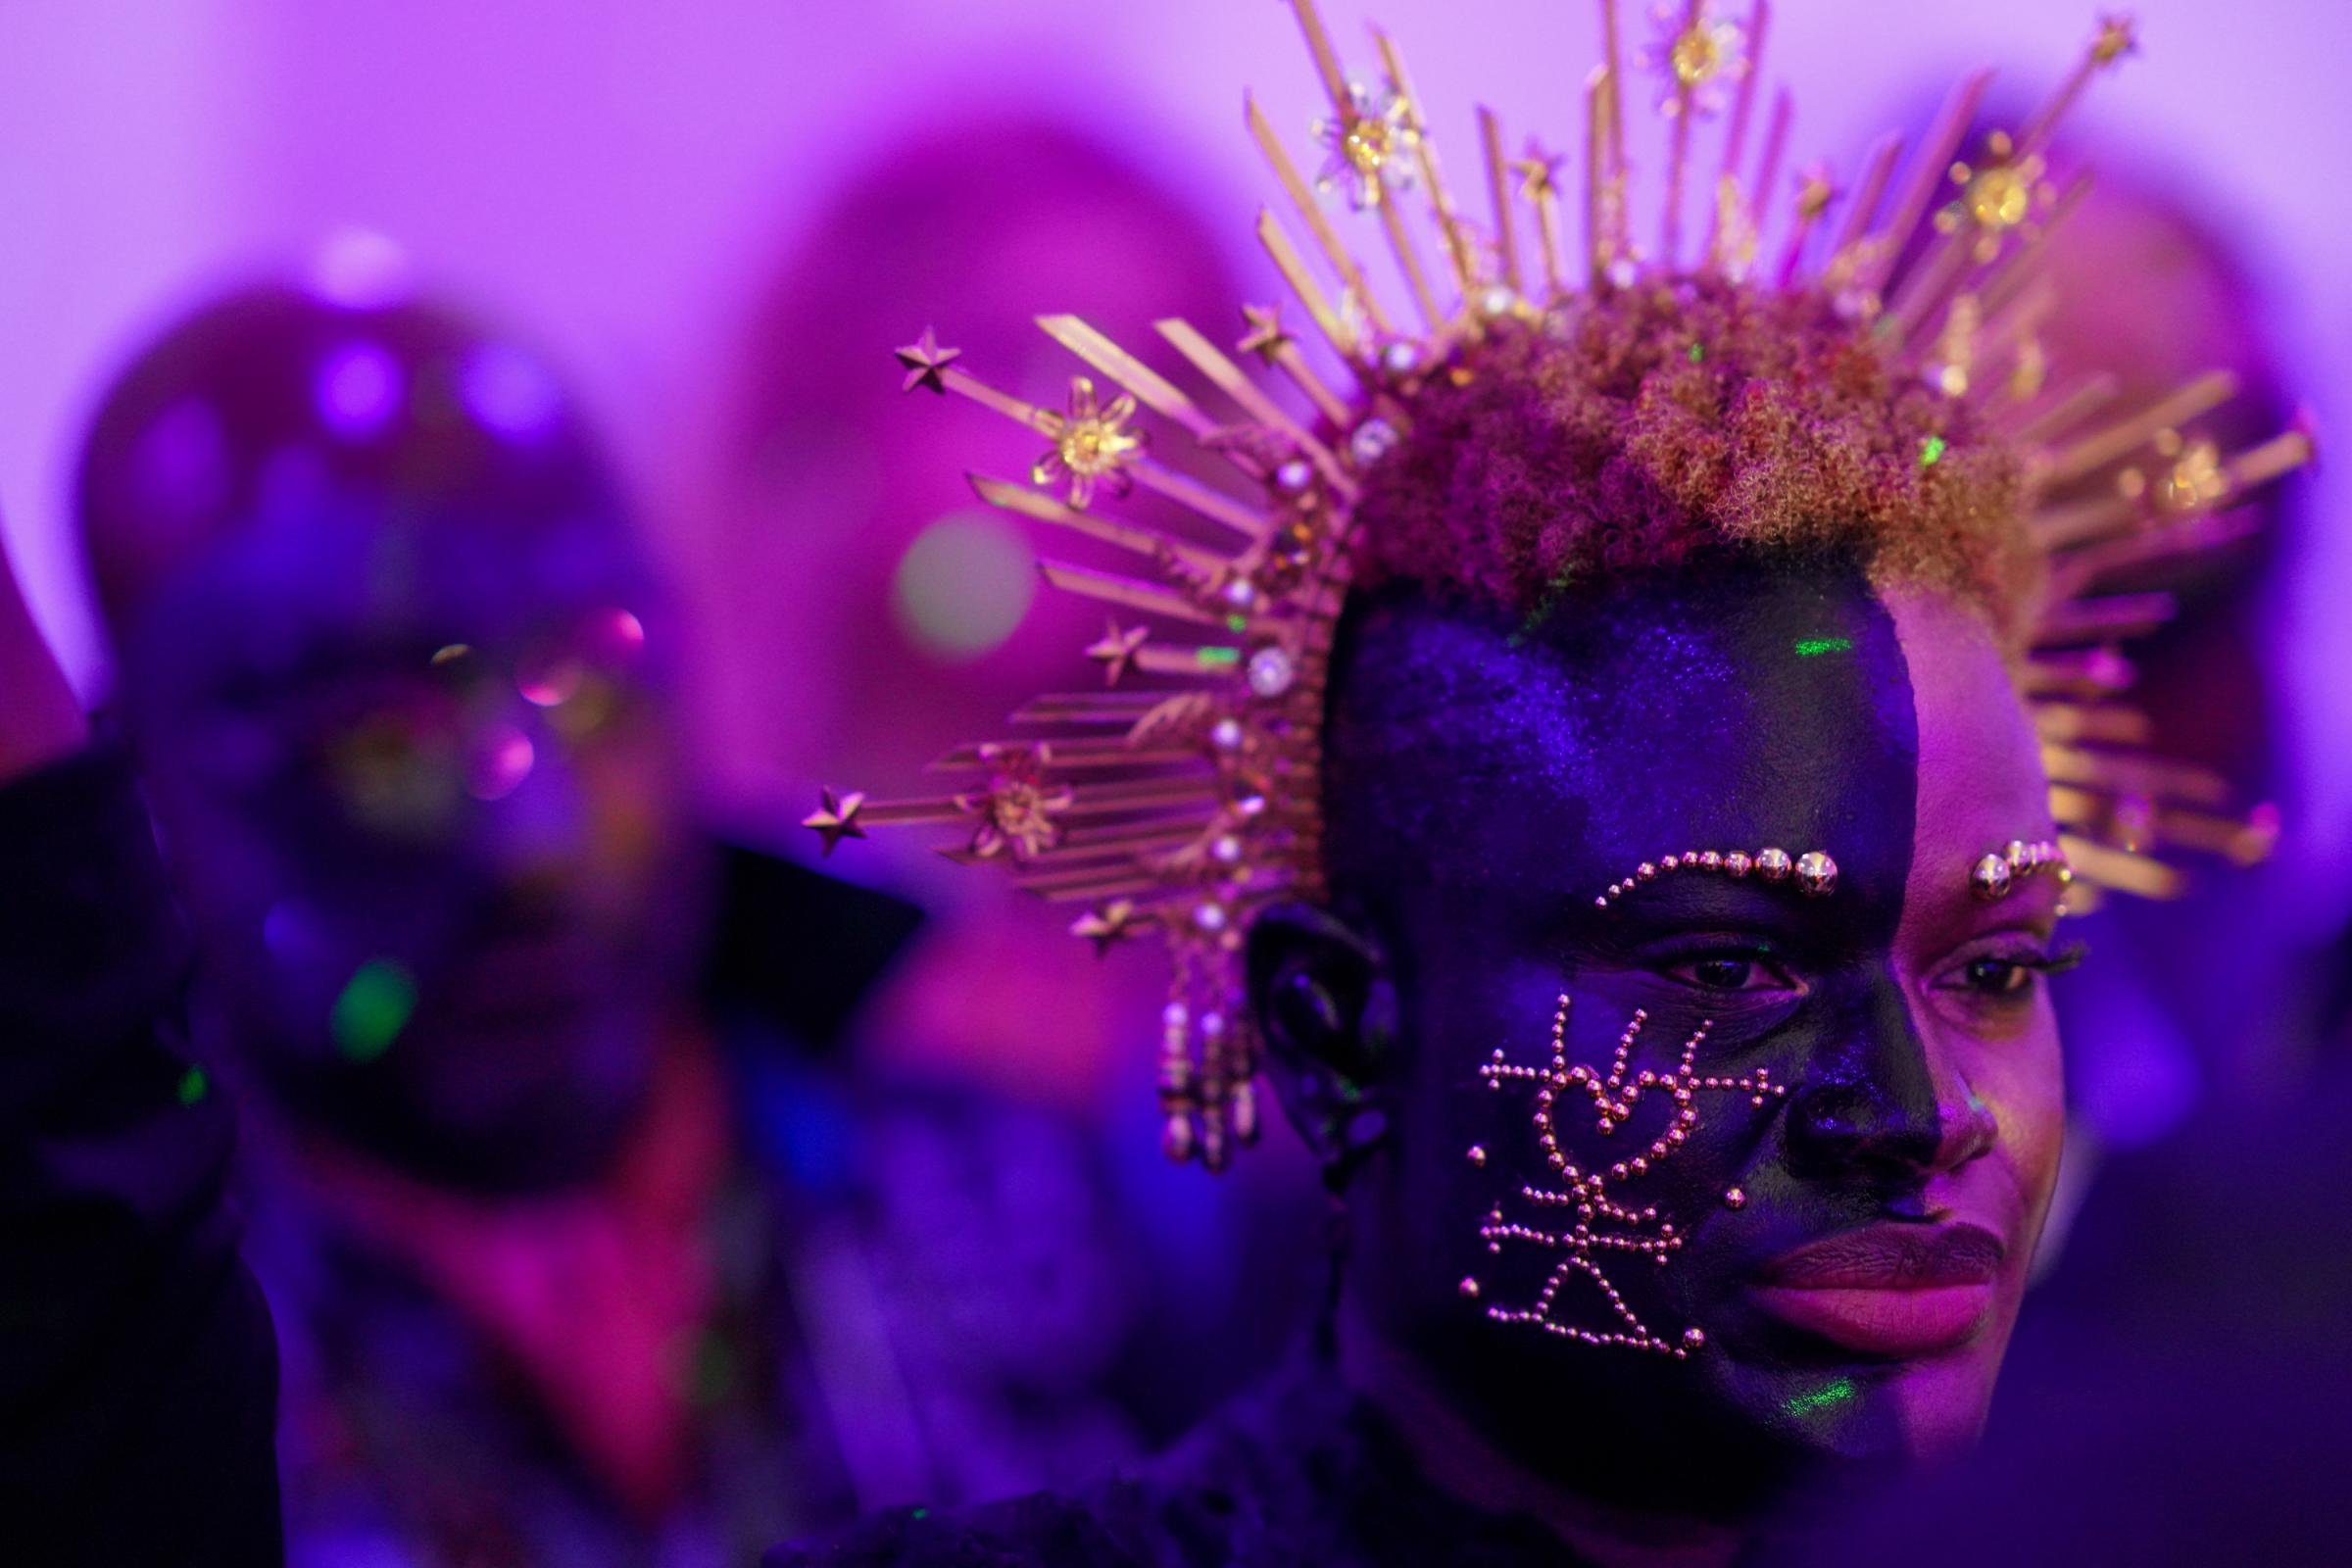 New York Vodou followers battle stereotypes about their religion